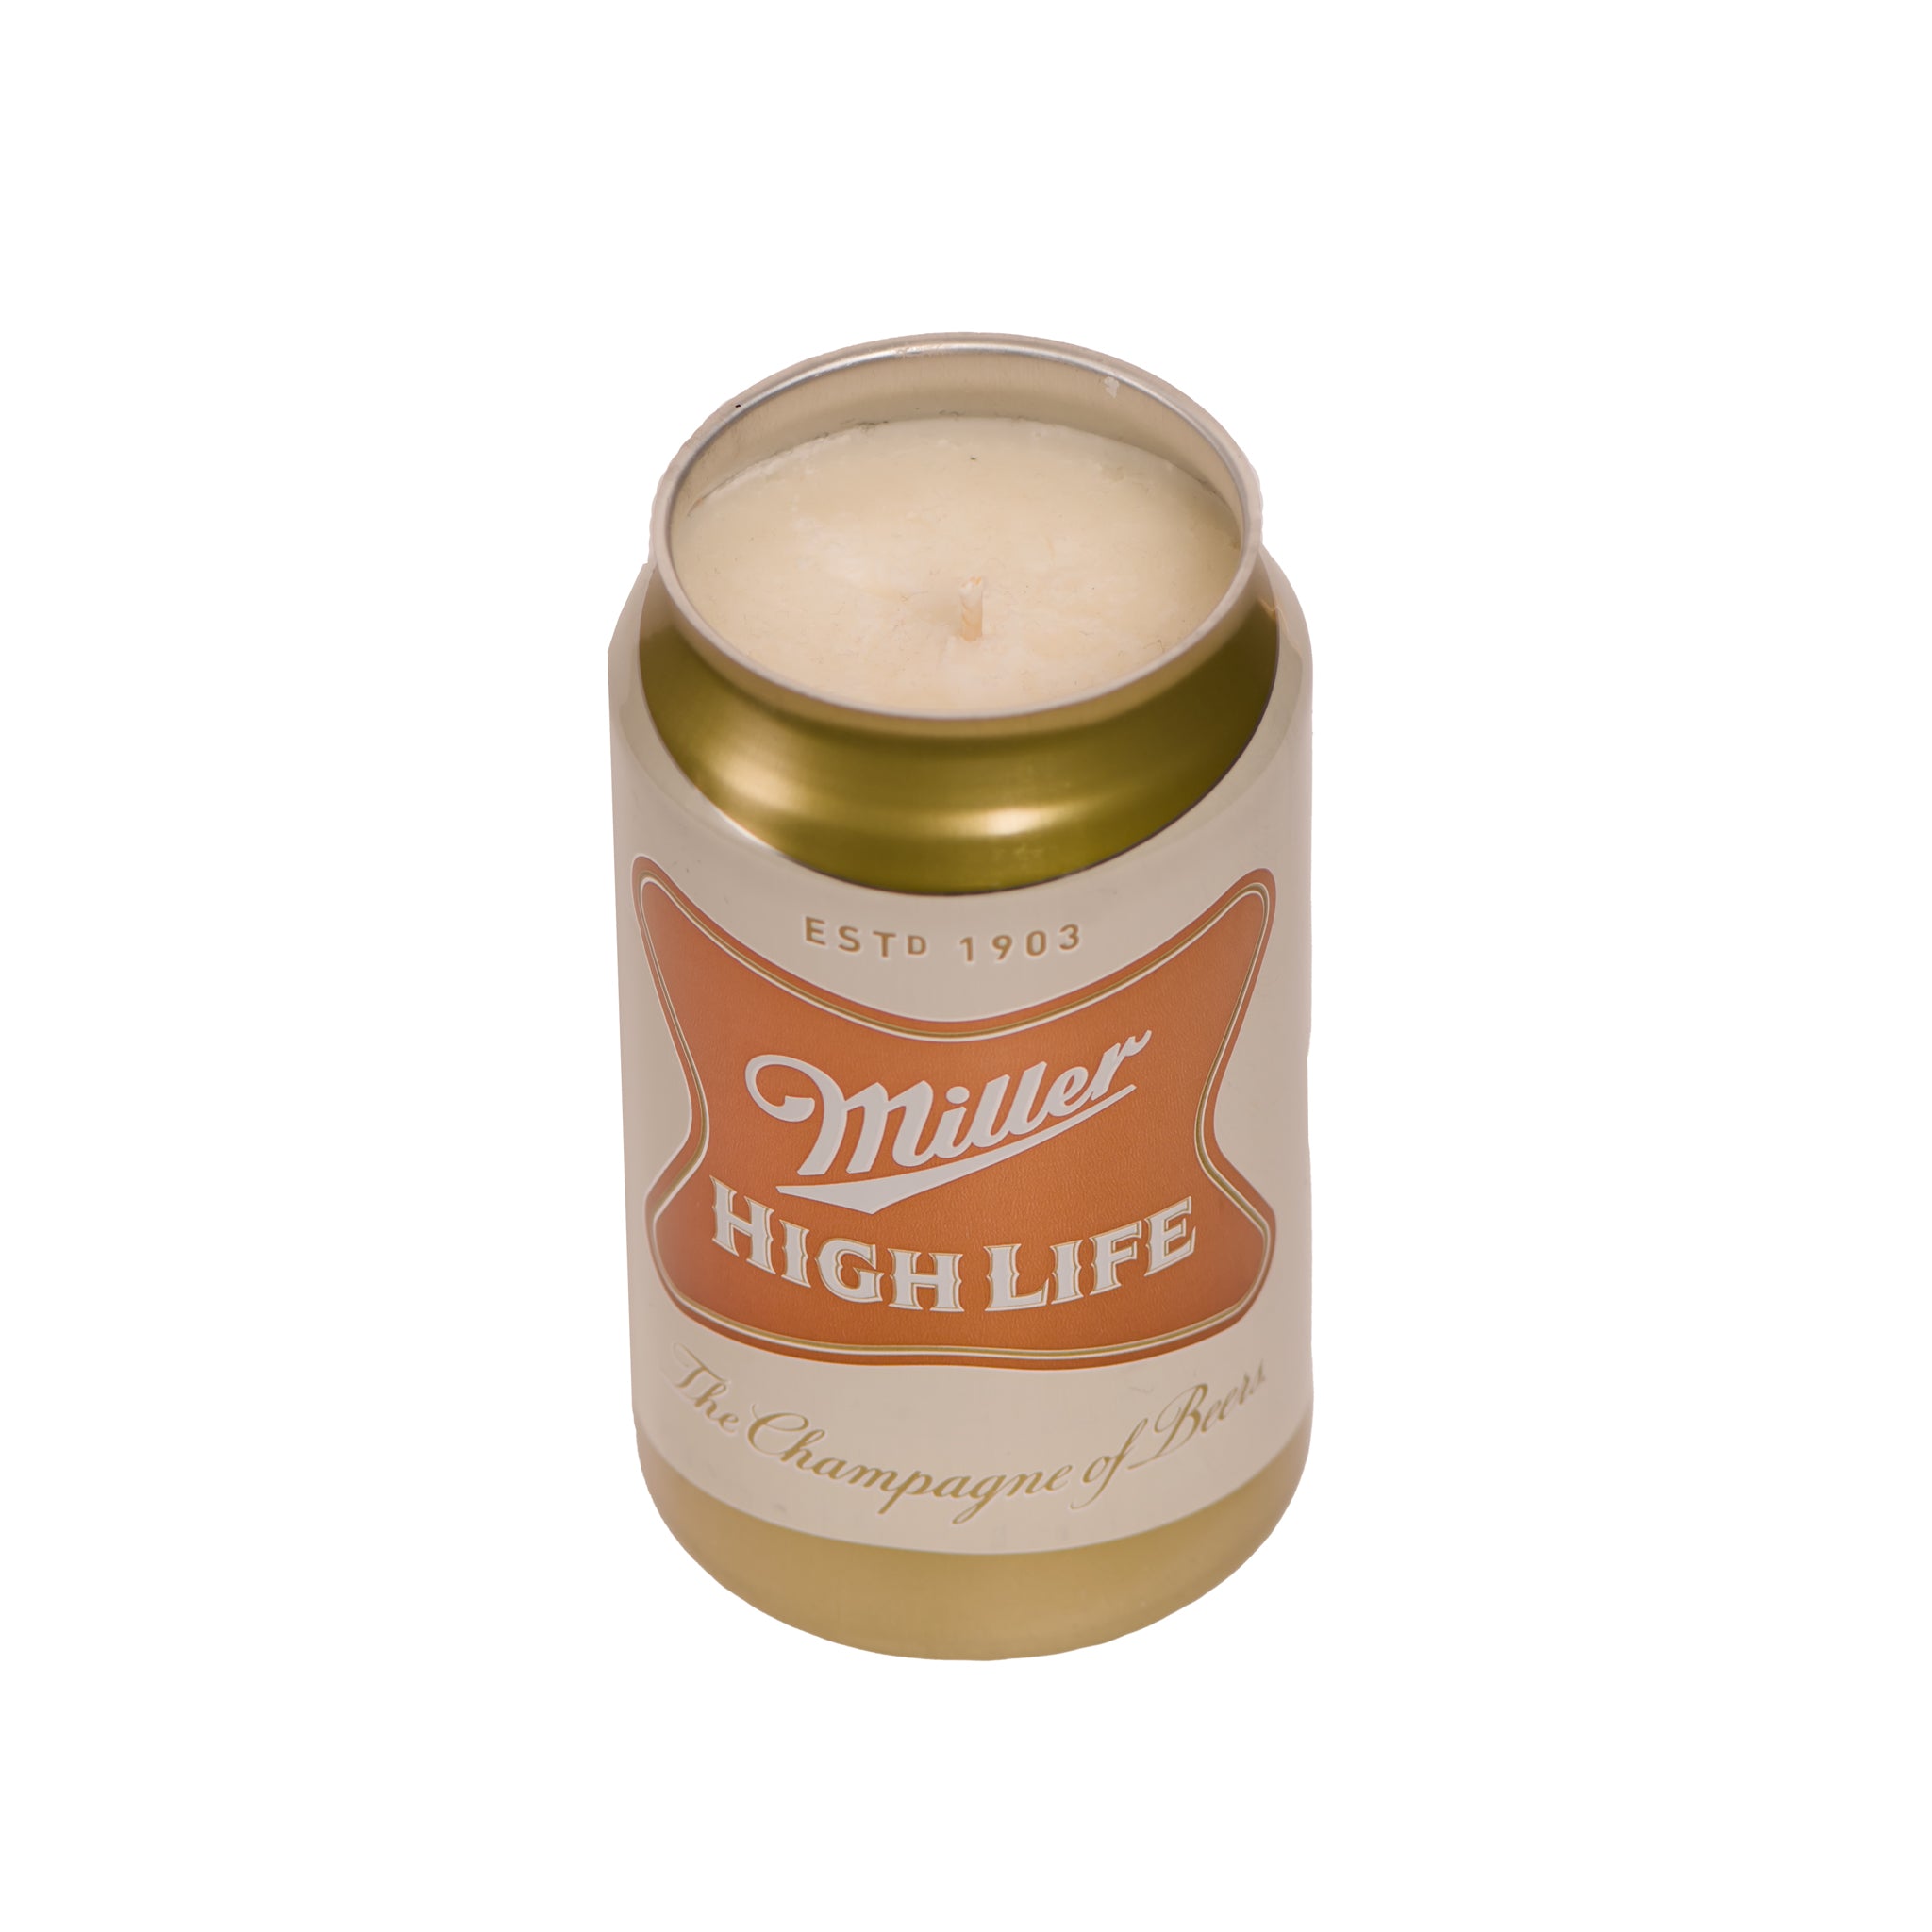 HIGH LIFE BEER CANDLE